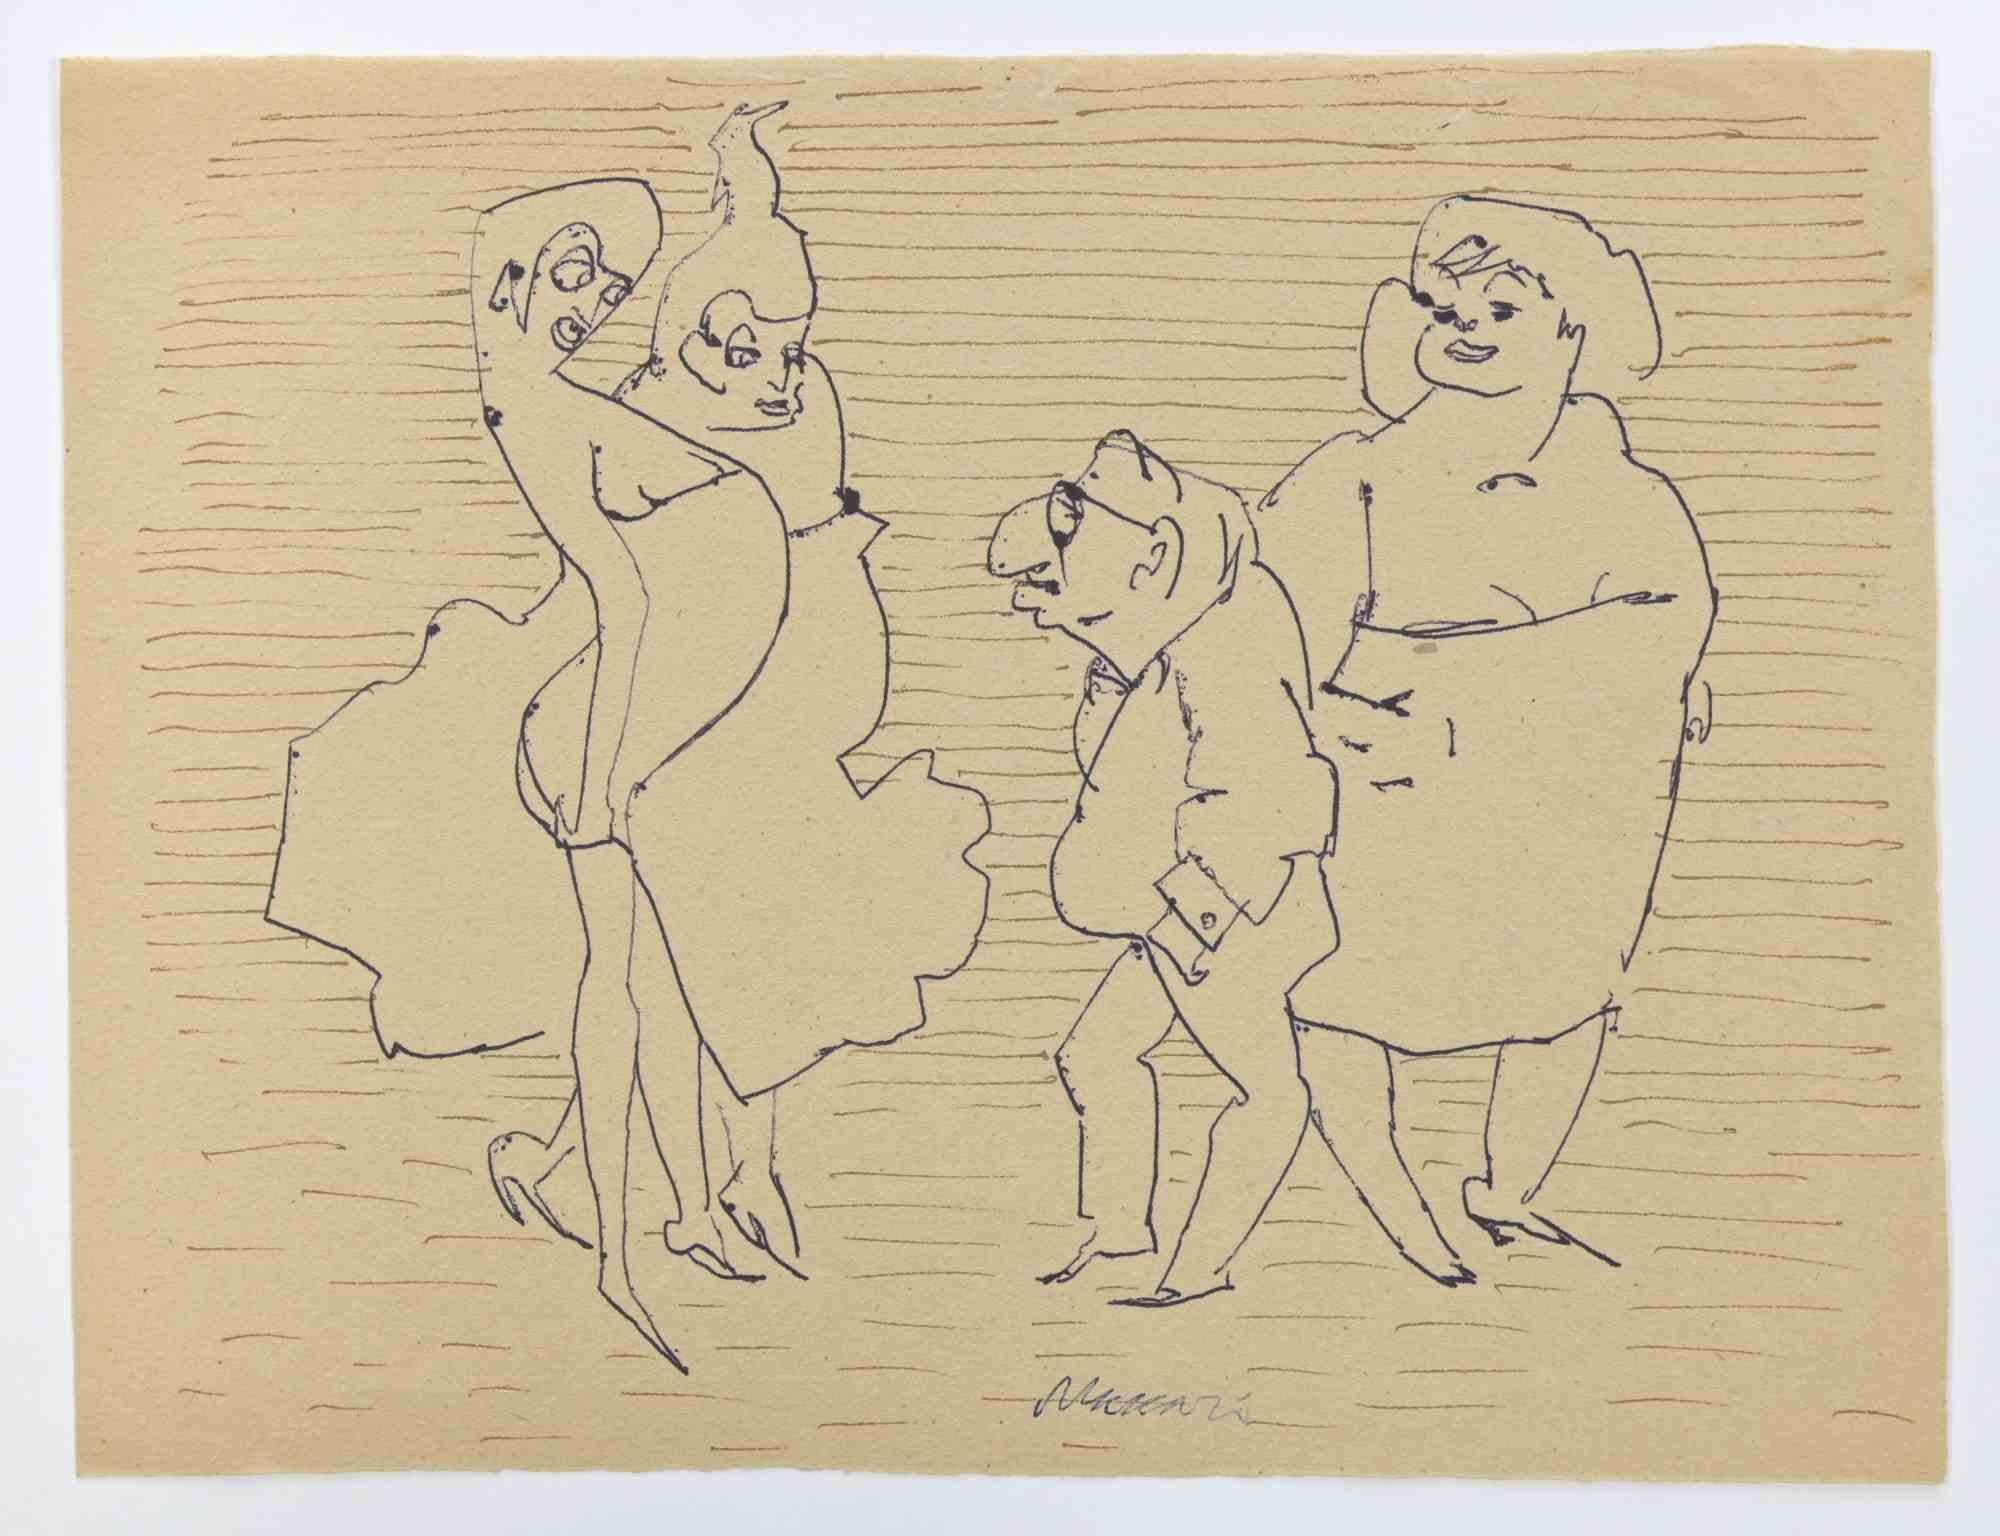 Flirtatious Women is a Pen Drawing realized by Mino Maccari  (1924-1989) in 1960s.

Hand-signed in the lower margin.

Good condition.

Mino Maccari (Siena, 1924-Rome, June 16, 1989) was an Italian writer, painter, engraver and journalist, winner of